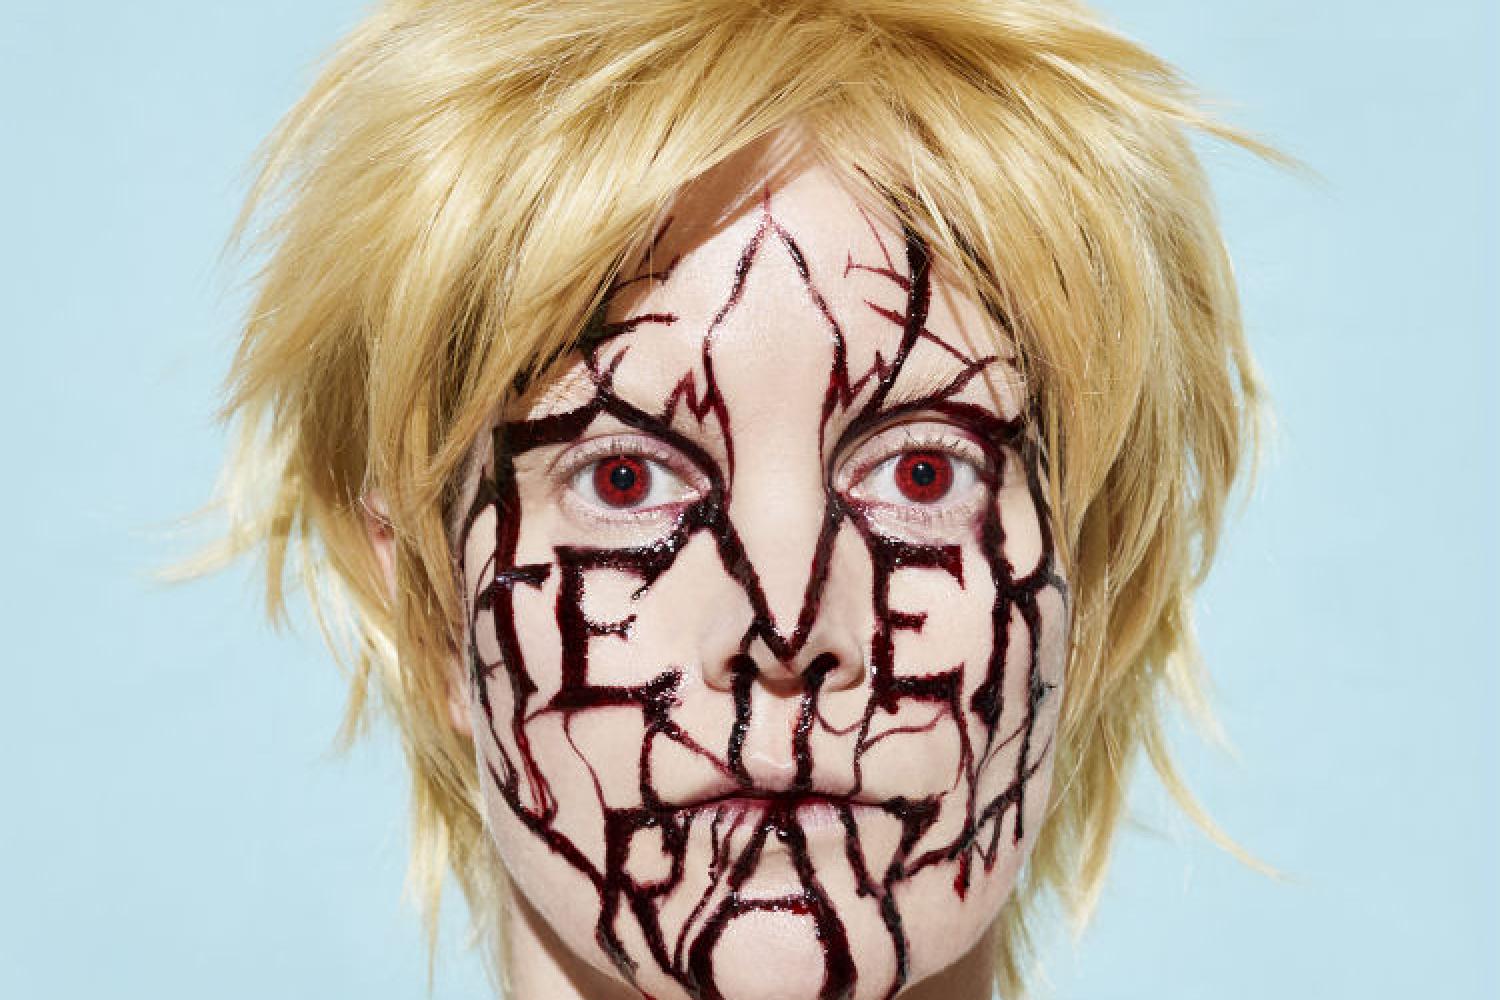 Fever Ray – Plunge